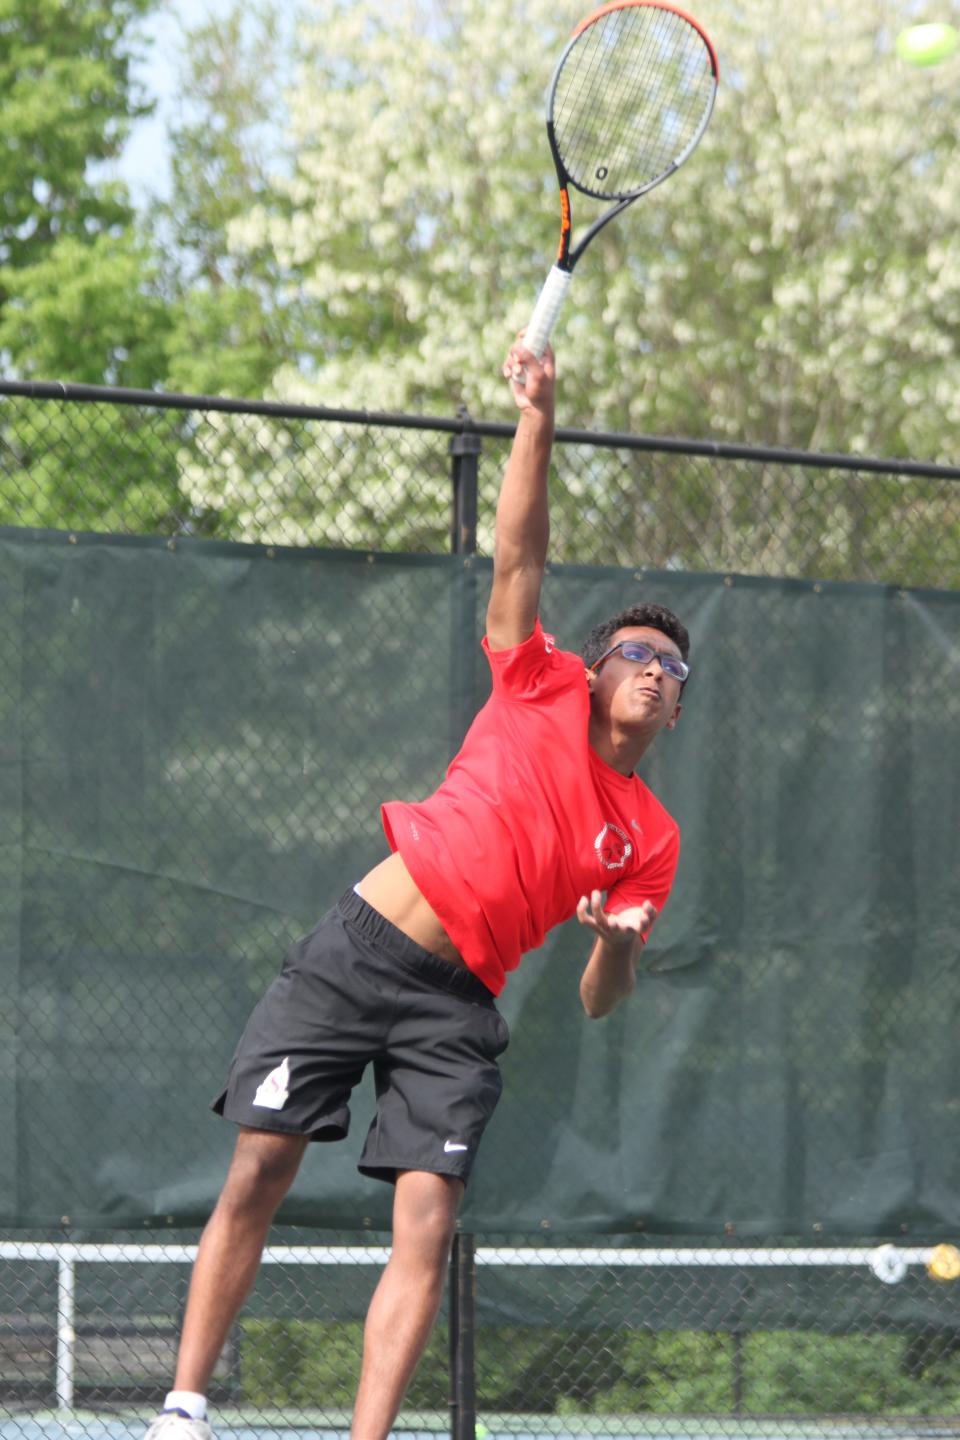 Springfield High's Krish Khurana serves the ball during the Central State Eight Conference boys tennis tournament at Washington Park on Friday, May 13.